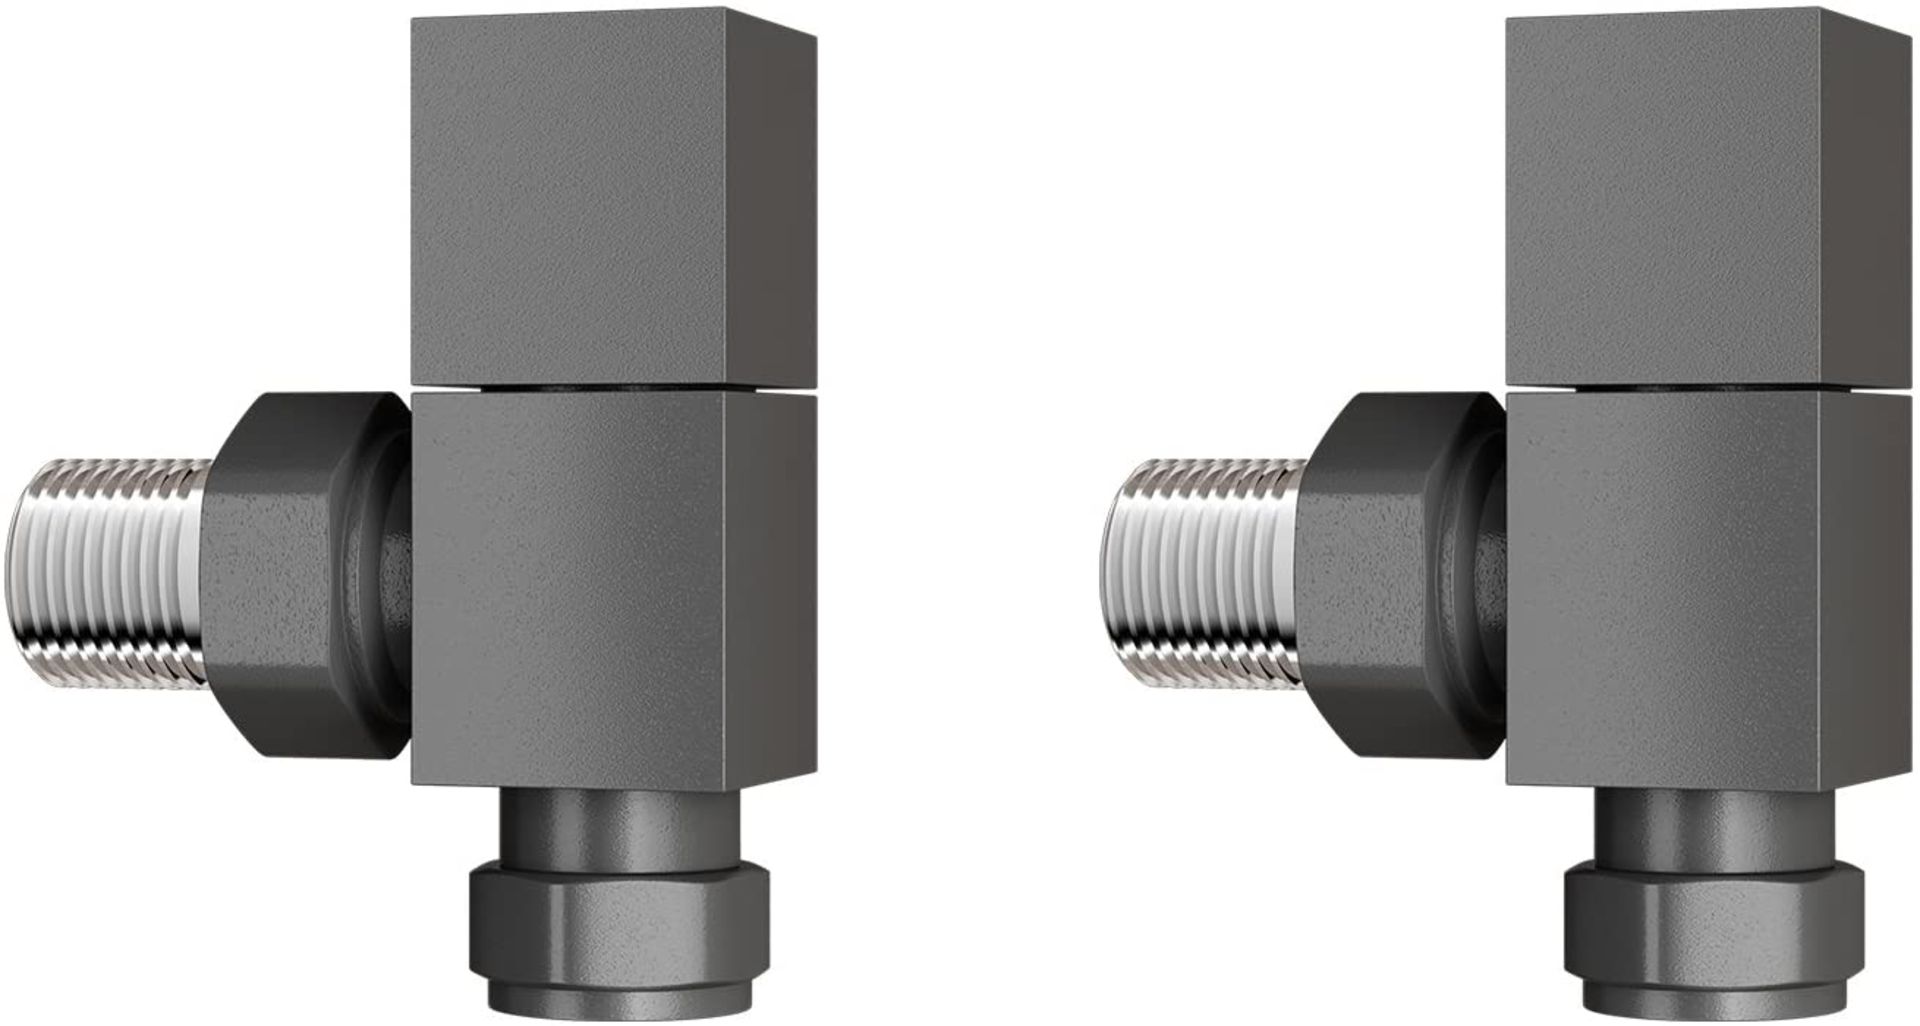 15 mm Standard Connection Square Angled Anthracite Radiator Valves. RA03A. Complies with BS2767...